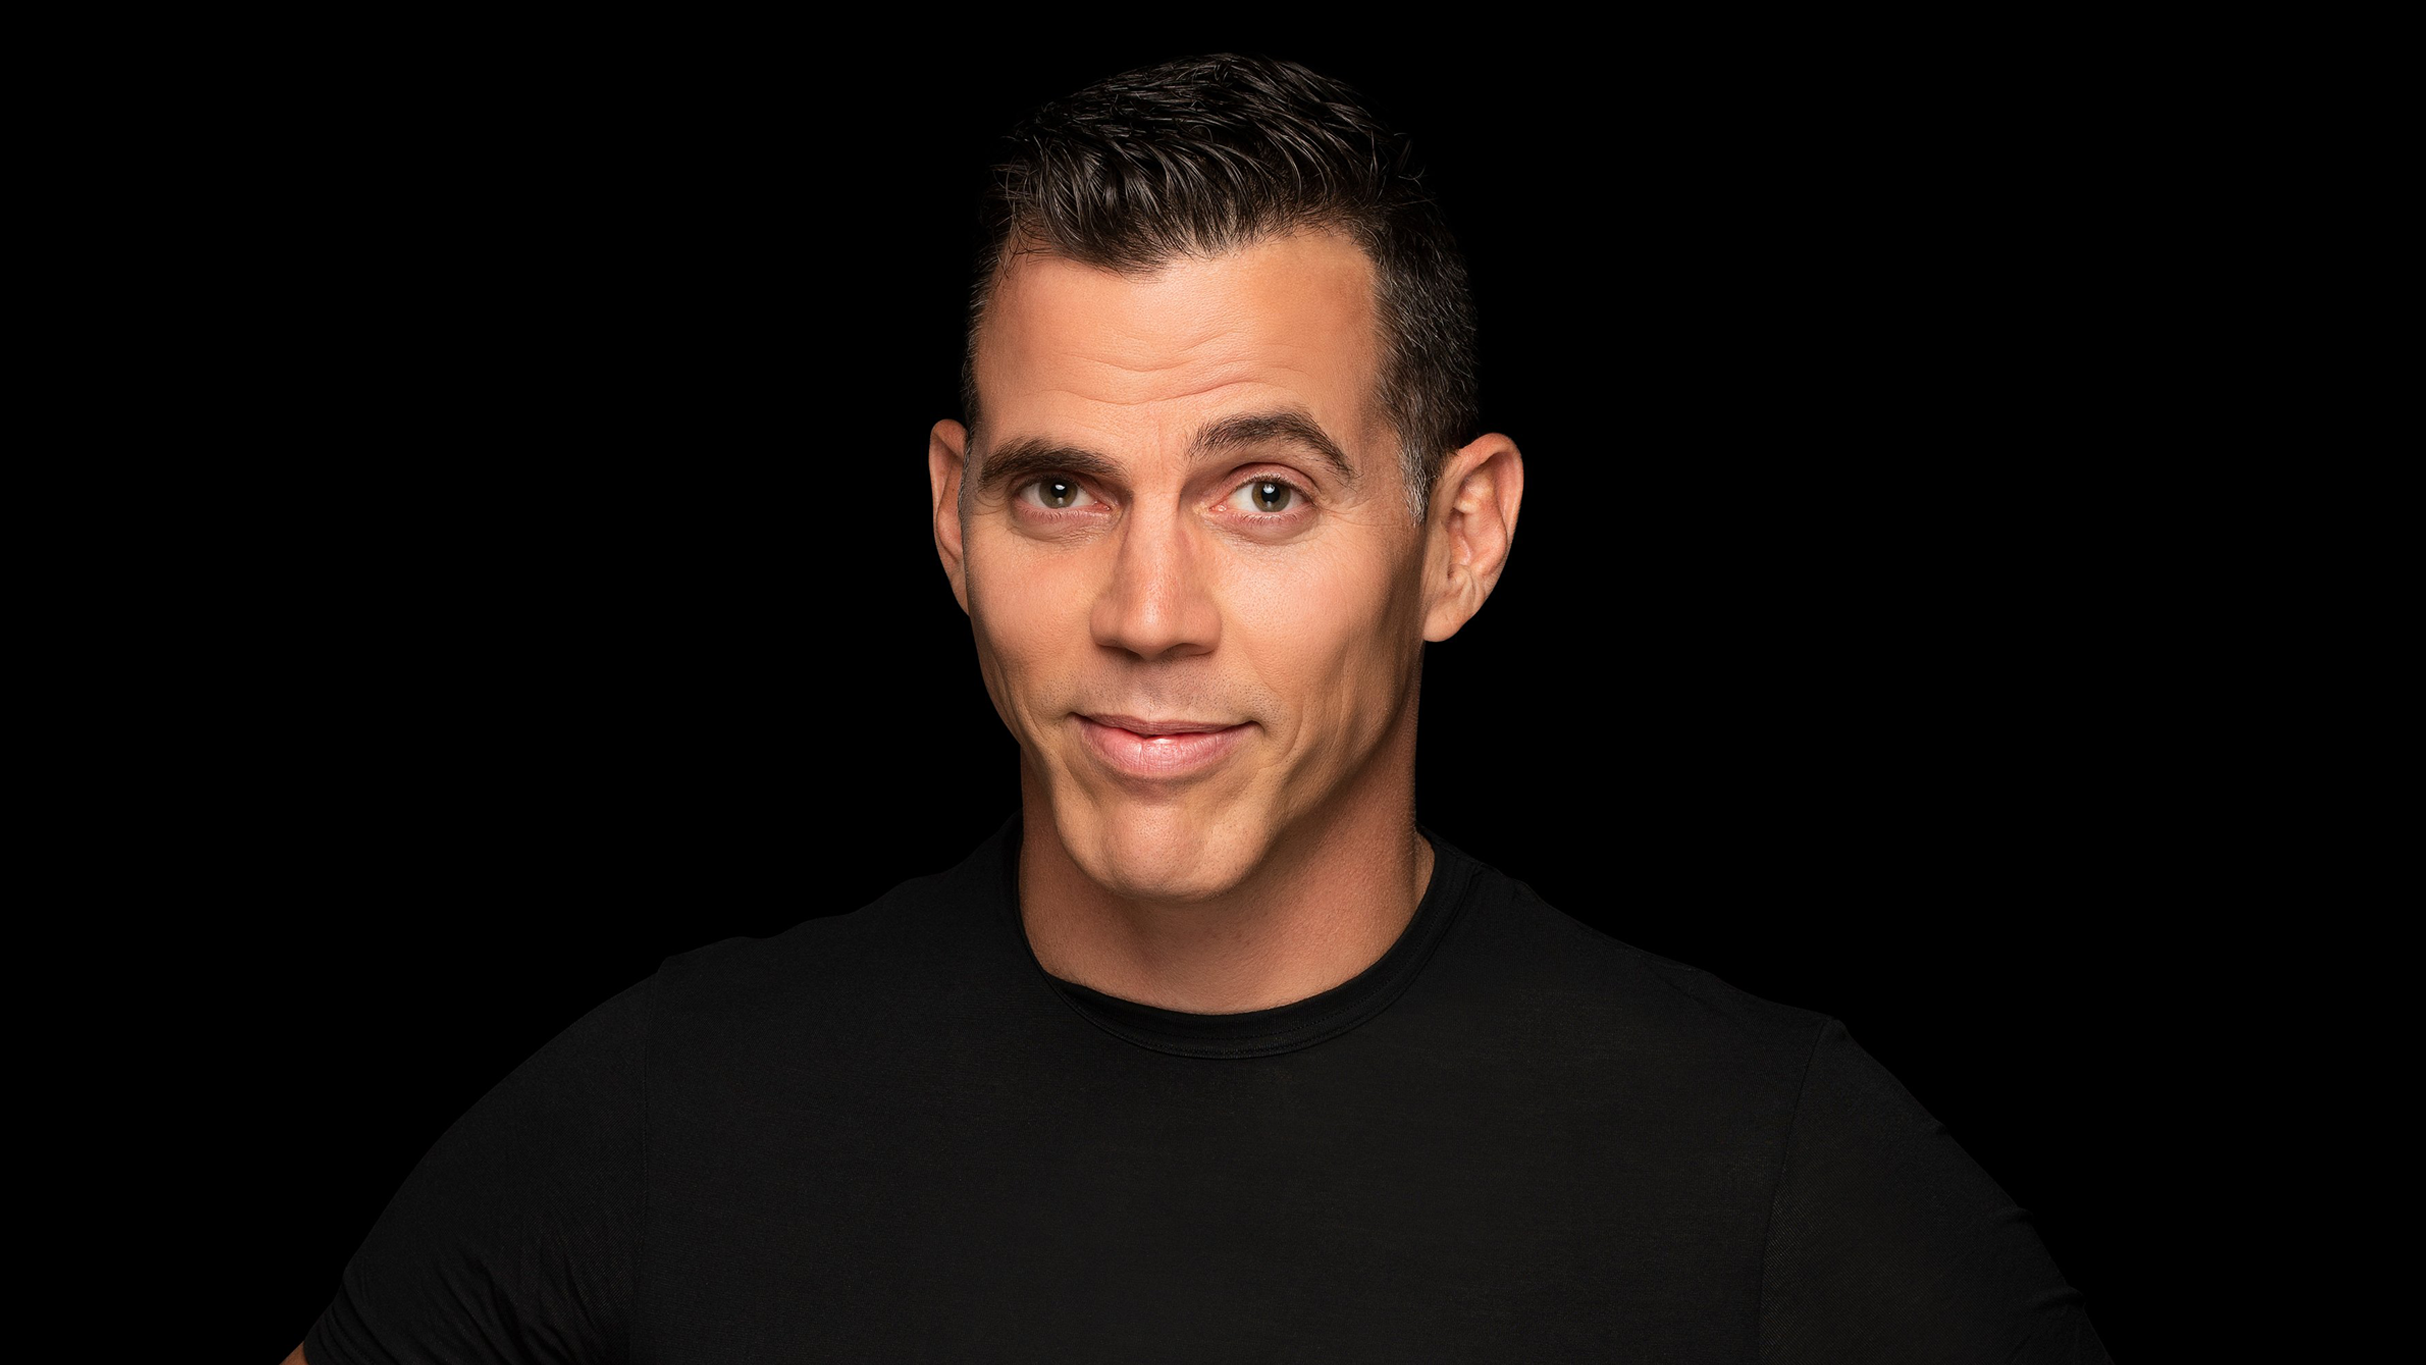 Steve-O presale code for your tickets in Rochester